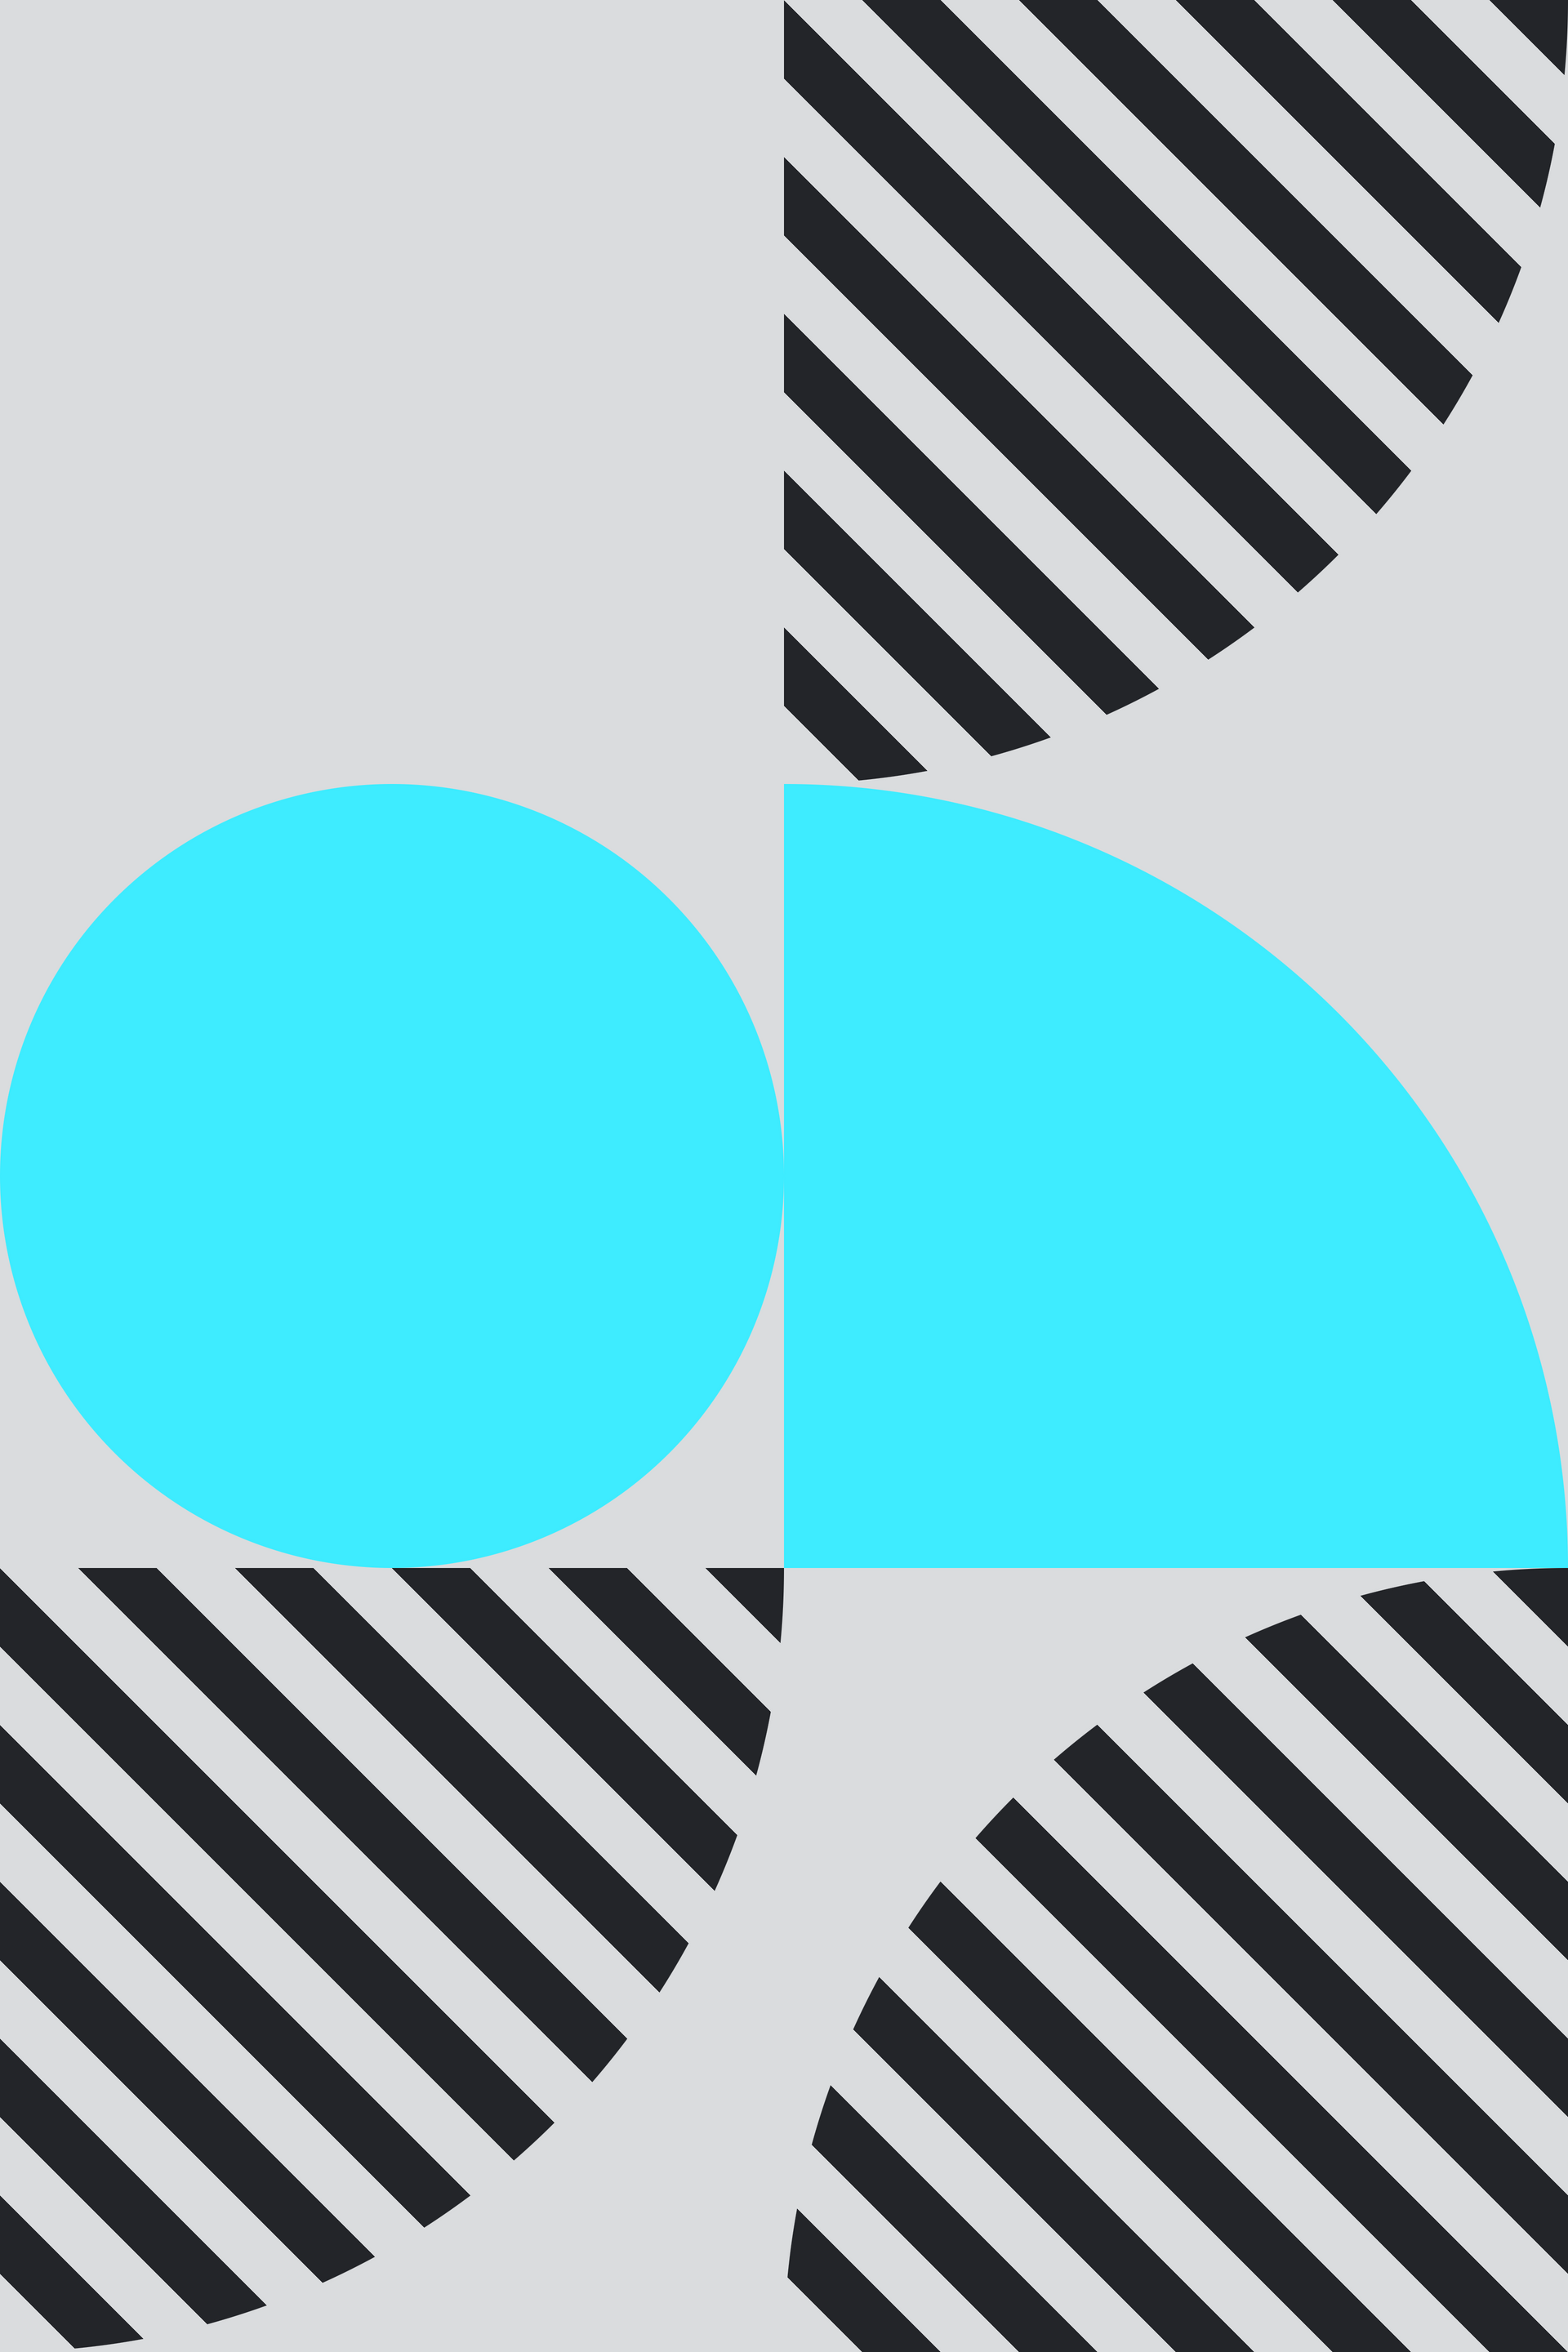 A black and white striped background with a blue circle in the middle.